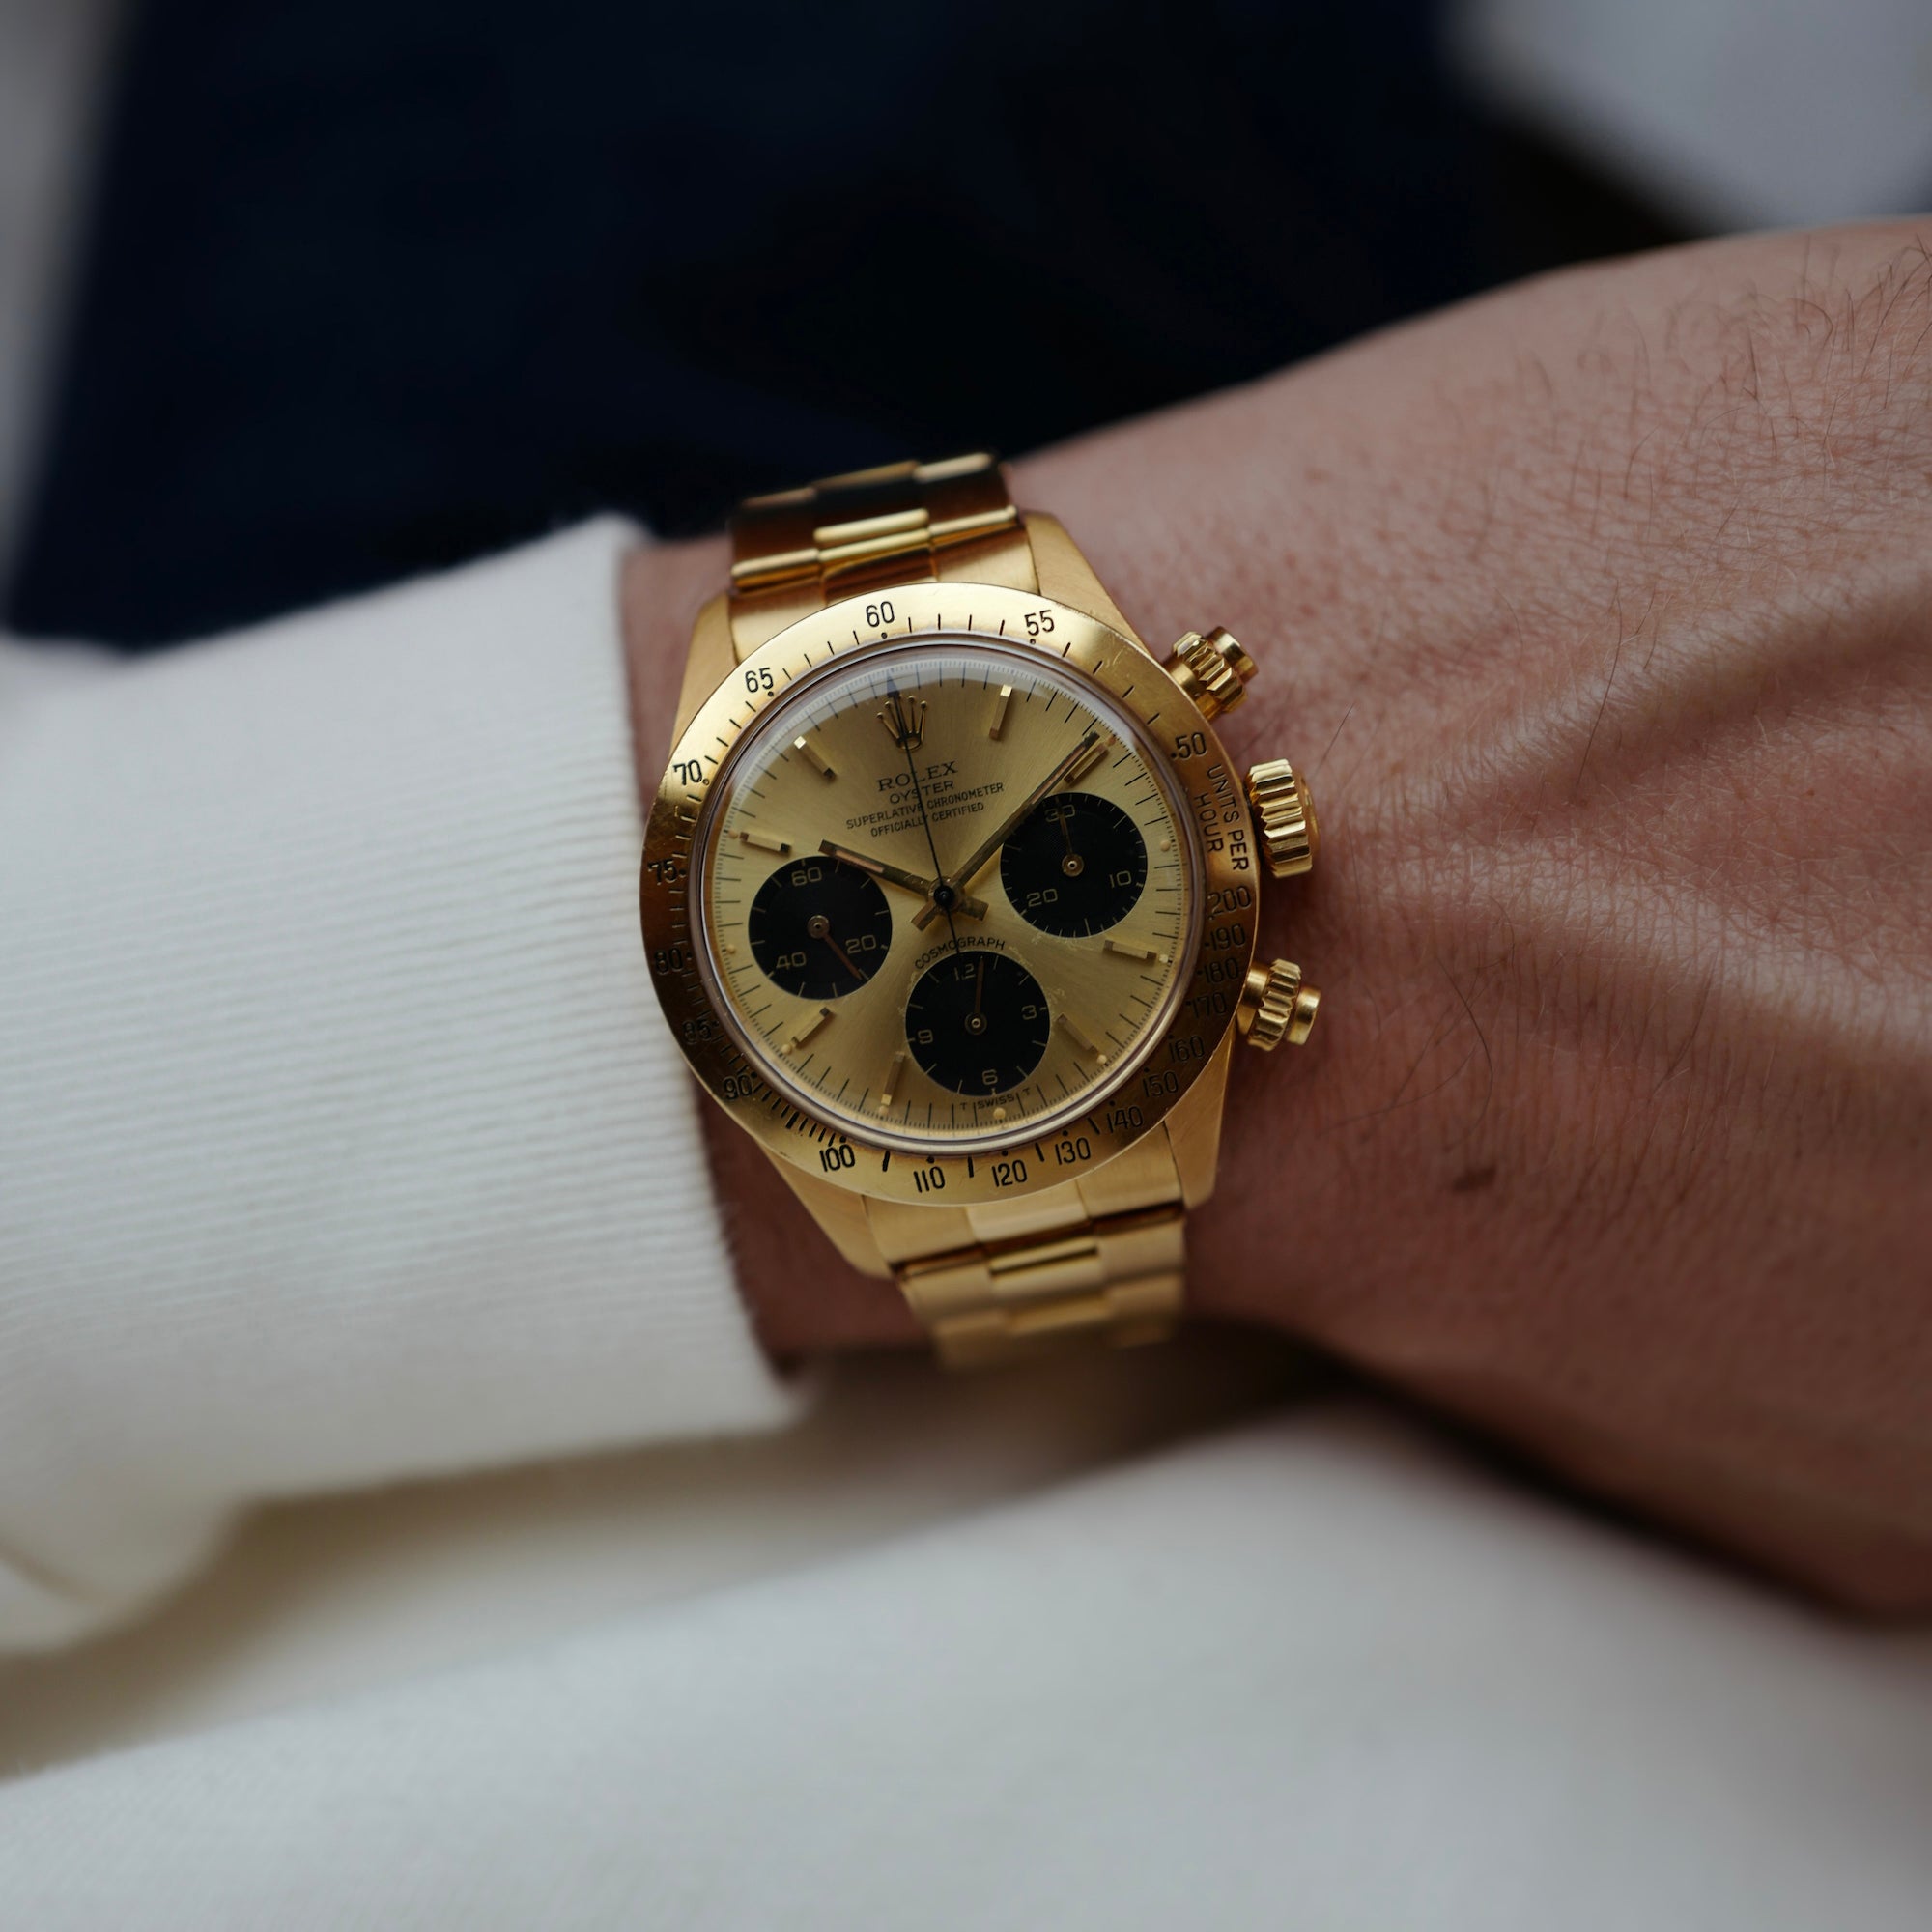 Rolex - Rolex Yellow Gold Cosmograph Daytona Watch Ref. 6265 (New Arrival) - The Keystone Watches